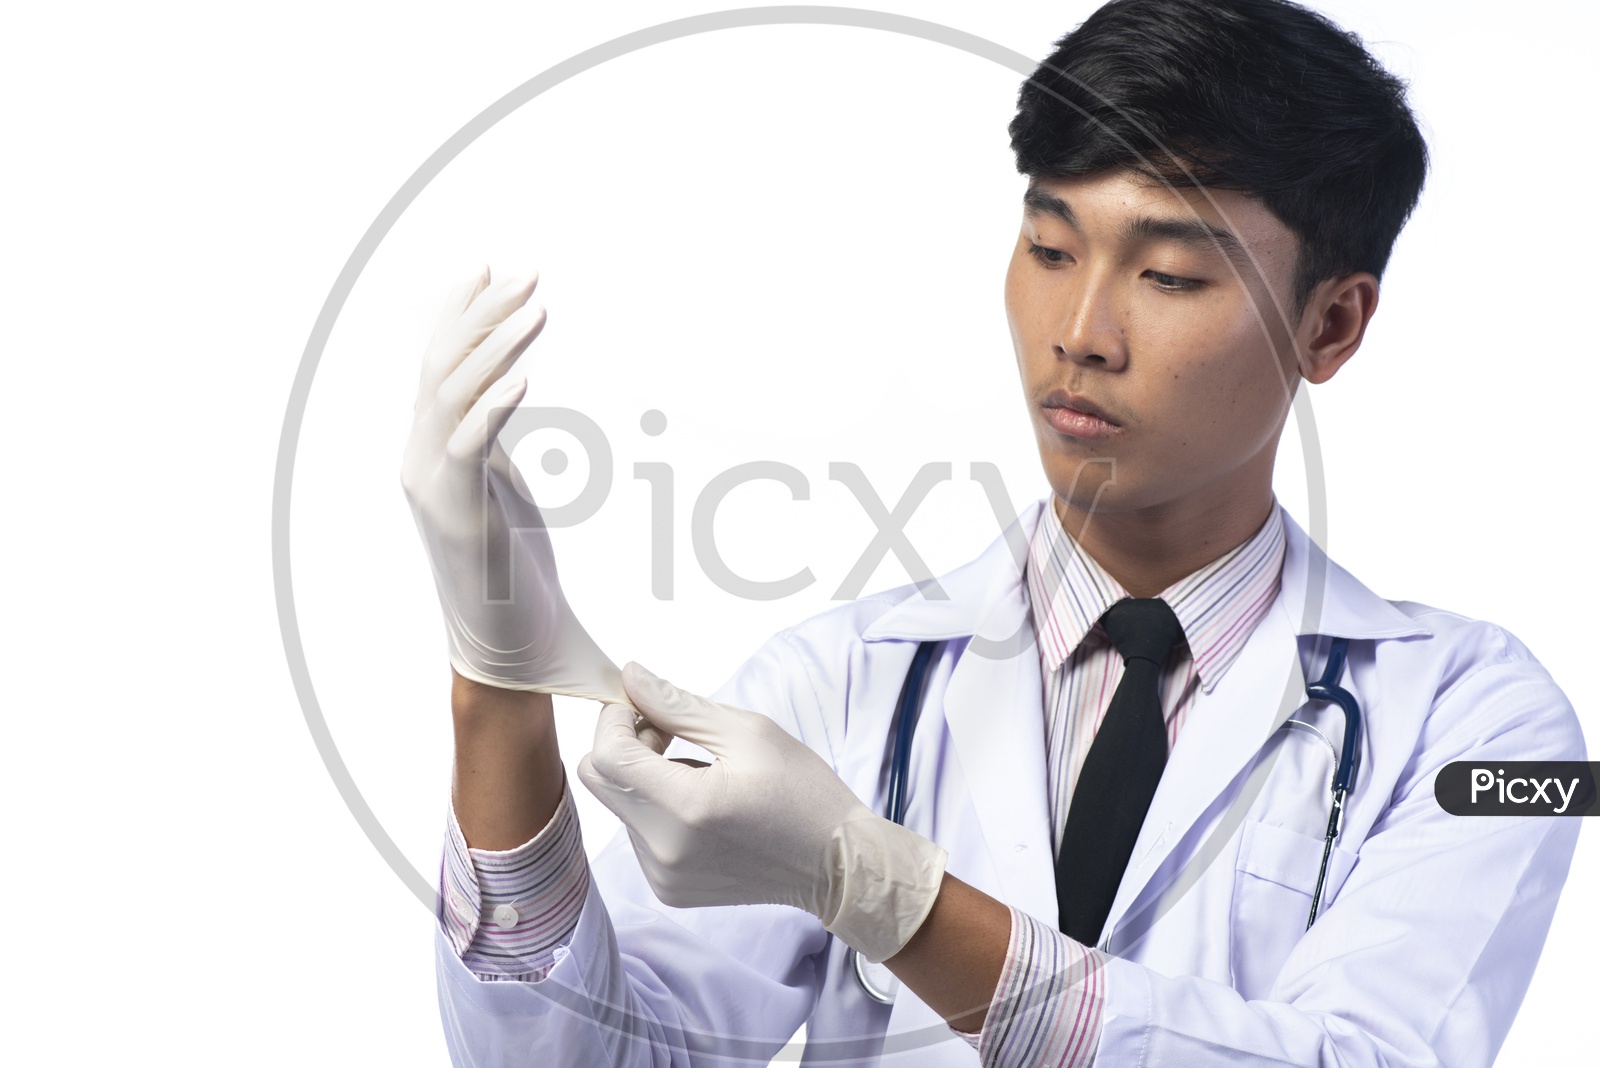 Asian Dentist Doctor Wearing Hand Gloves Isolated on White Background